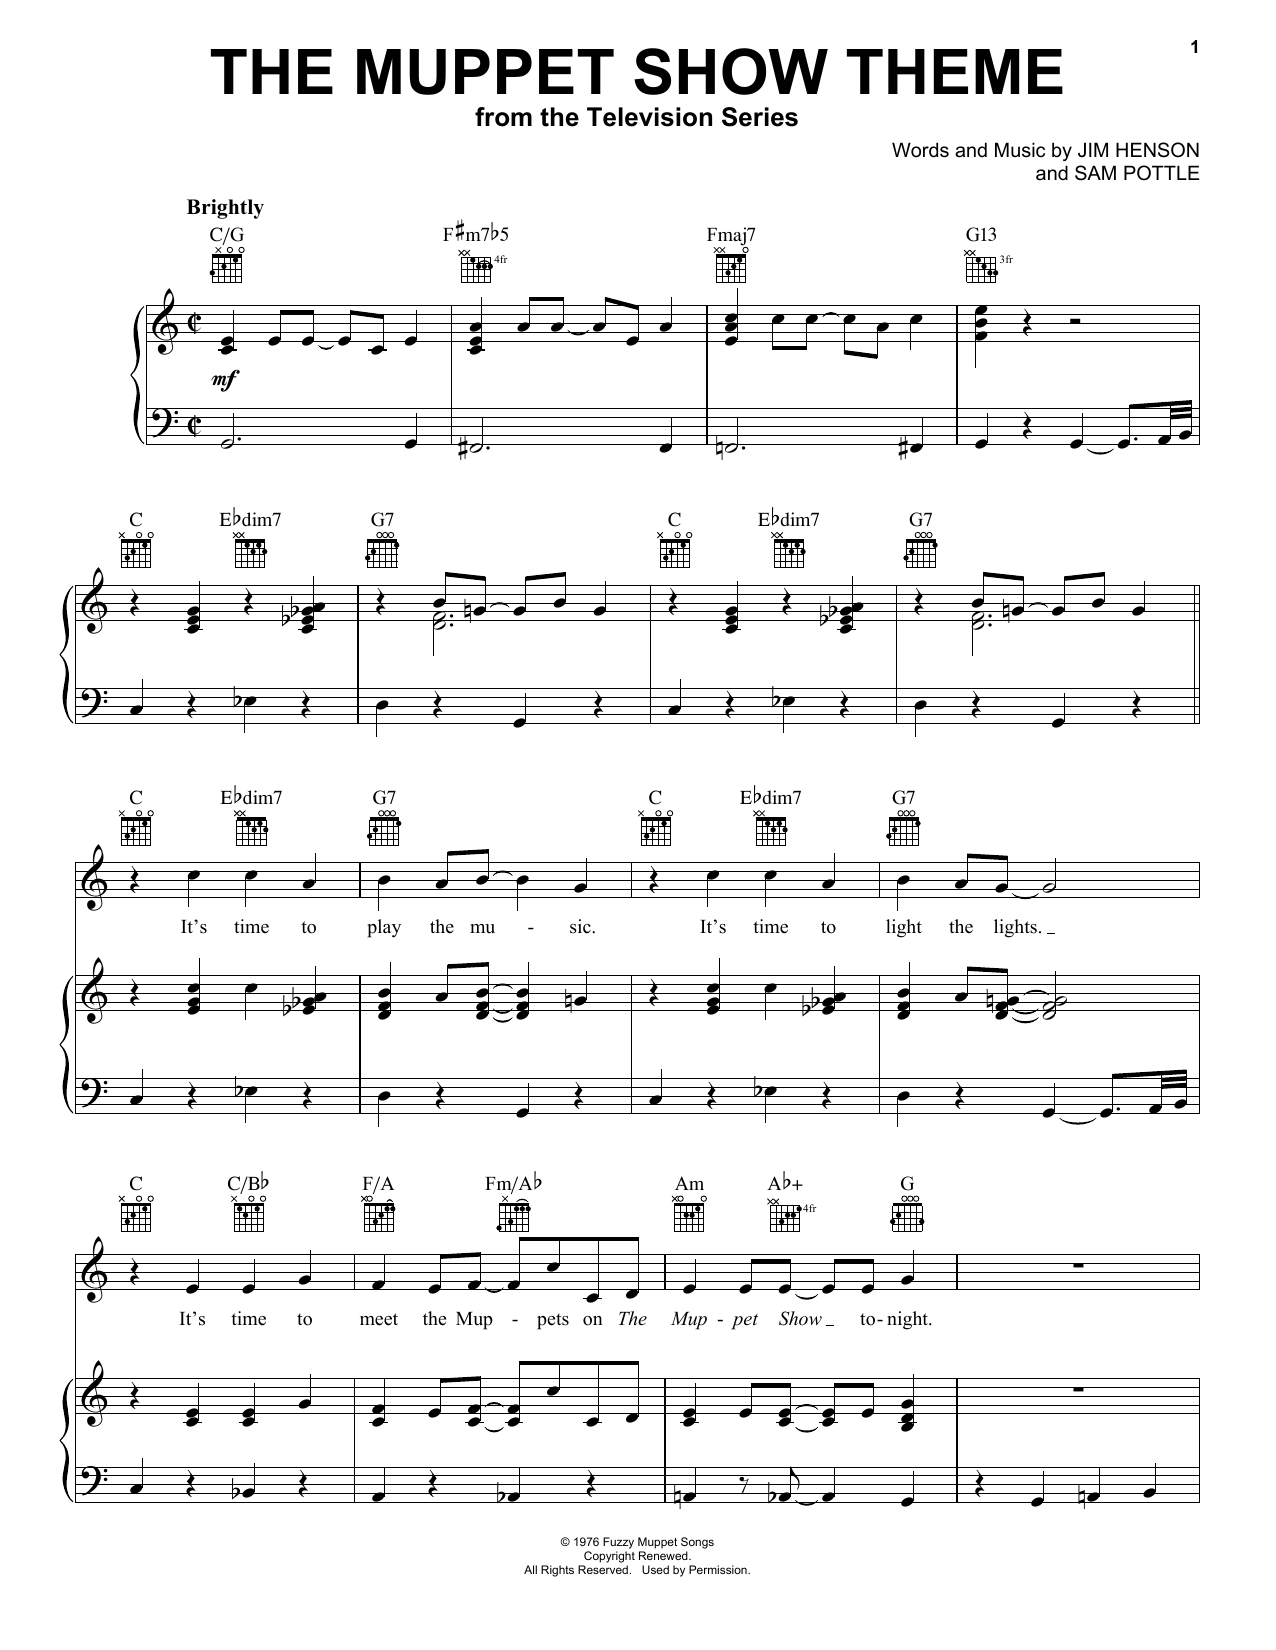 Jim Henson The Muppet Show Theme sheet music notes and chords. Download Printable PDF.